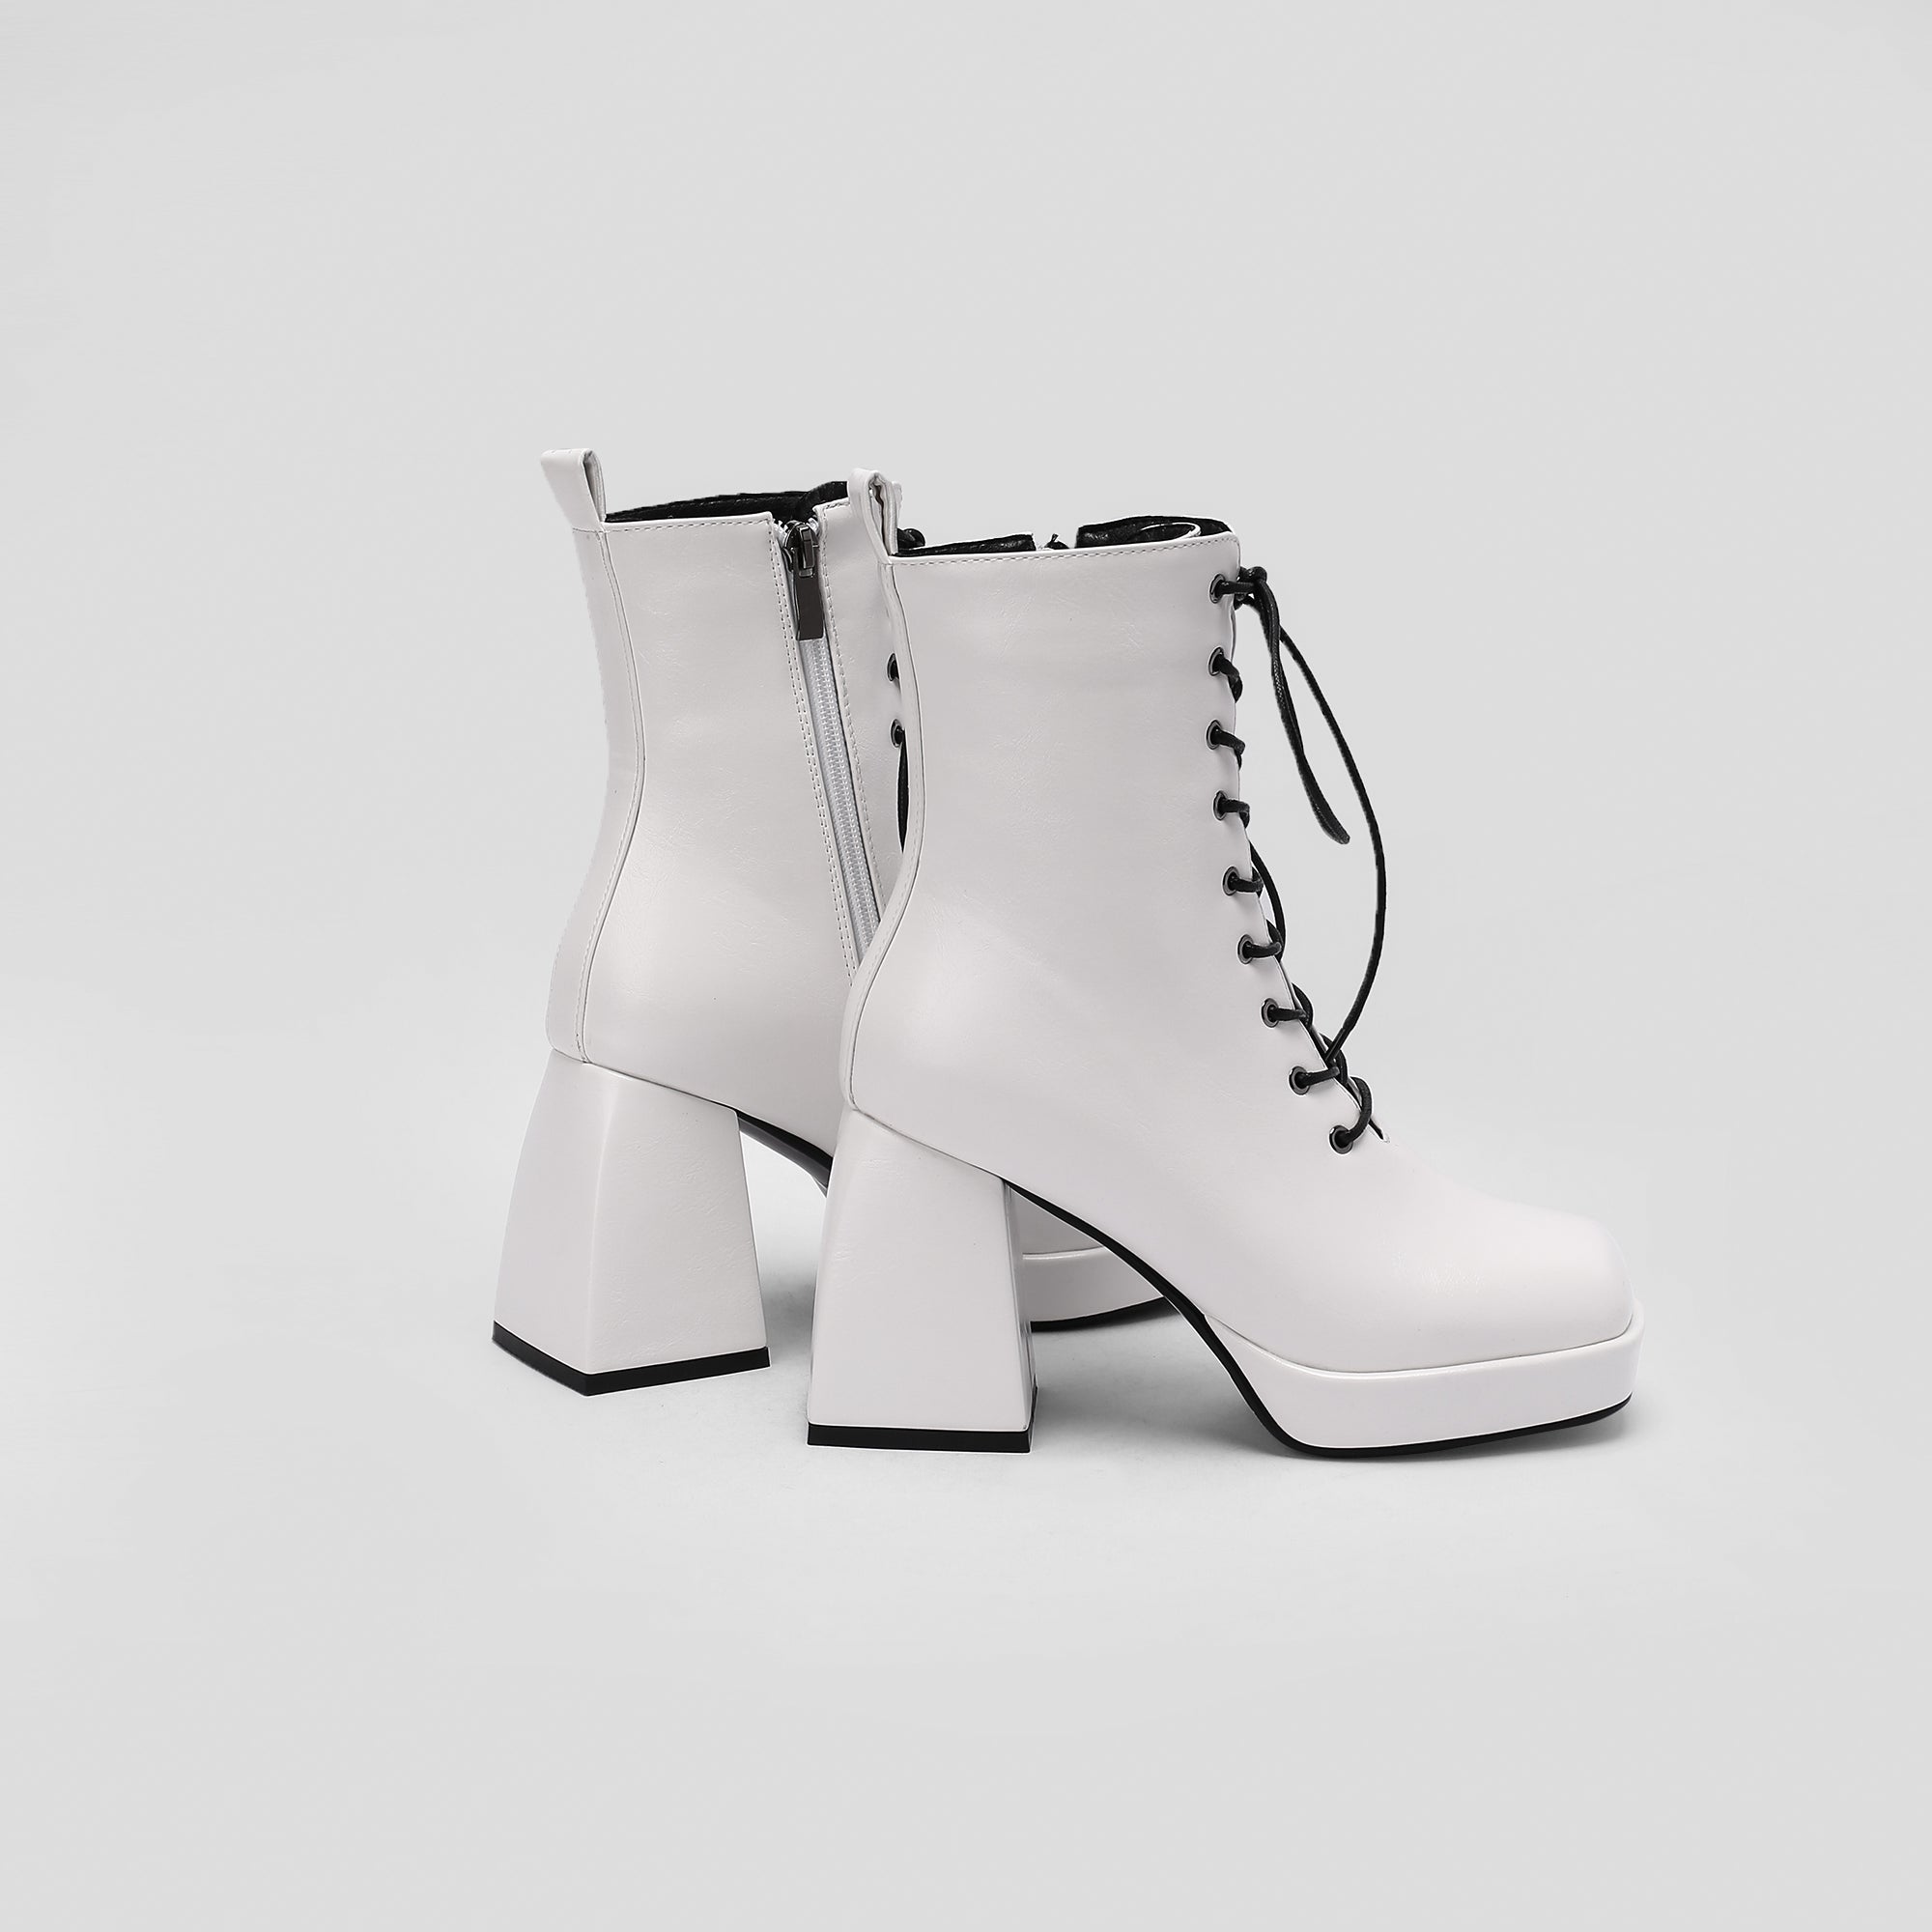 Brooke Lace up Chunky Ankle Boots Newgew